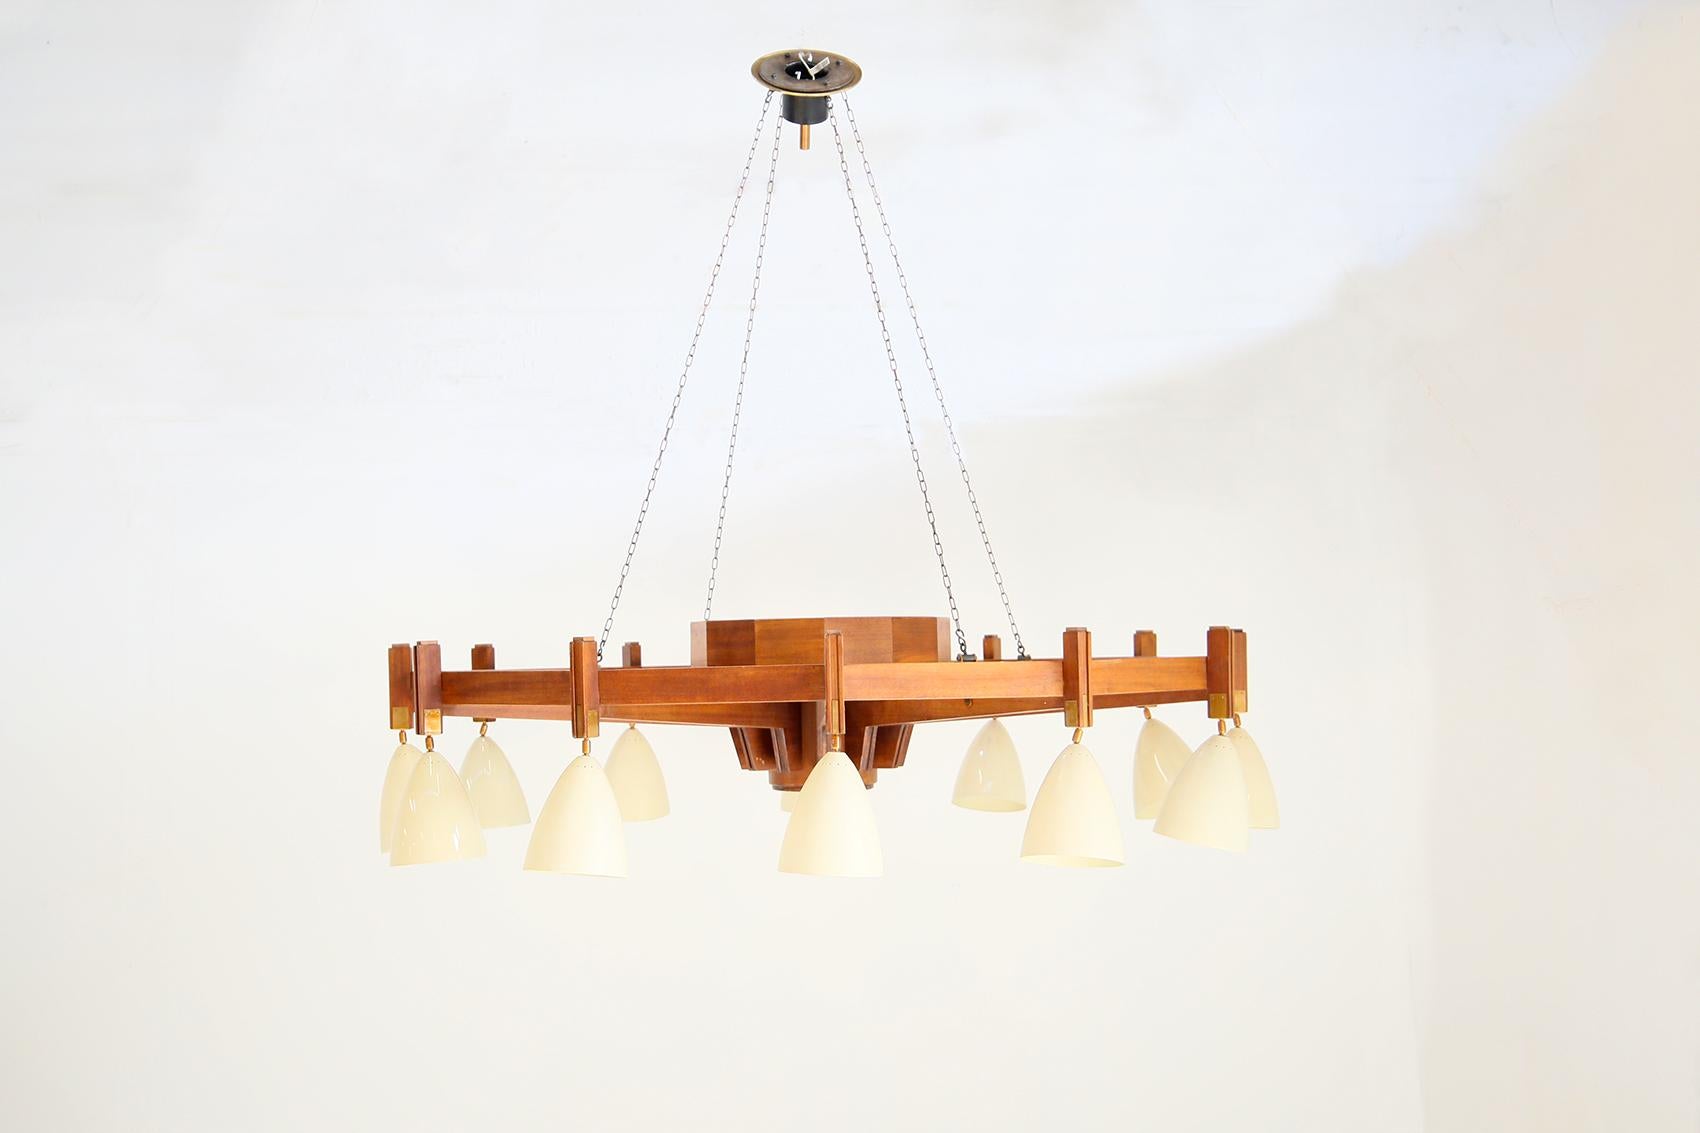 Beautiful and very large 1950s Italian midcentury Chandelier in BBPR Studio style. The large chandelier features a noble wood frame with straight, clean lines and a round shape. The chandelier features 13 lights including a central one and 12